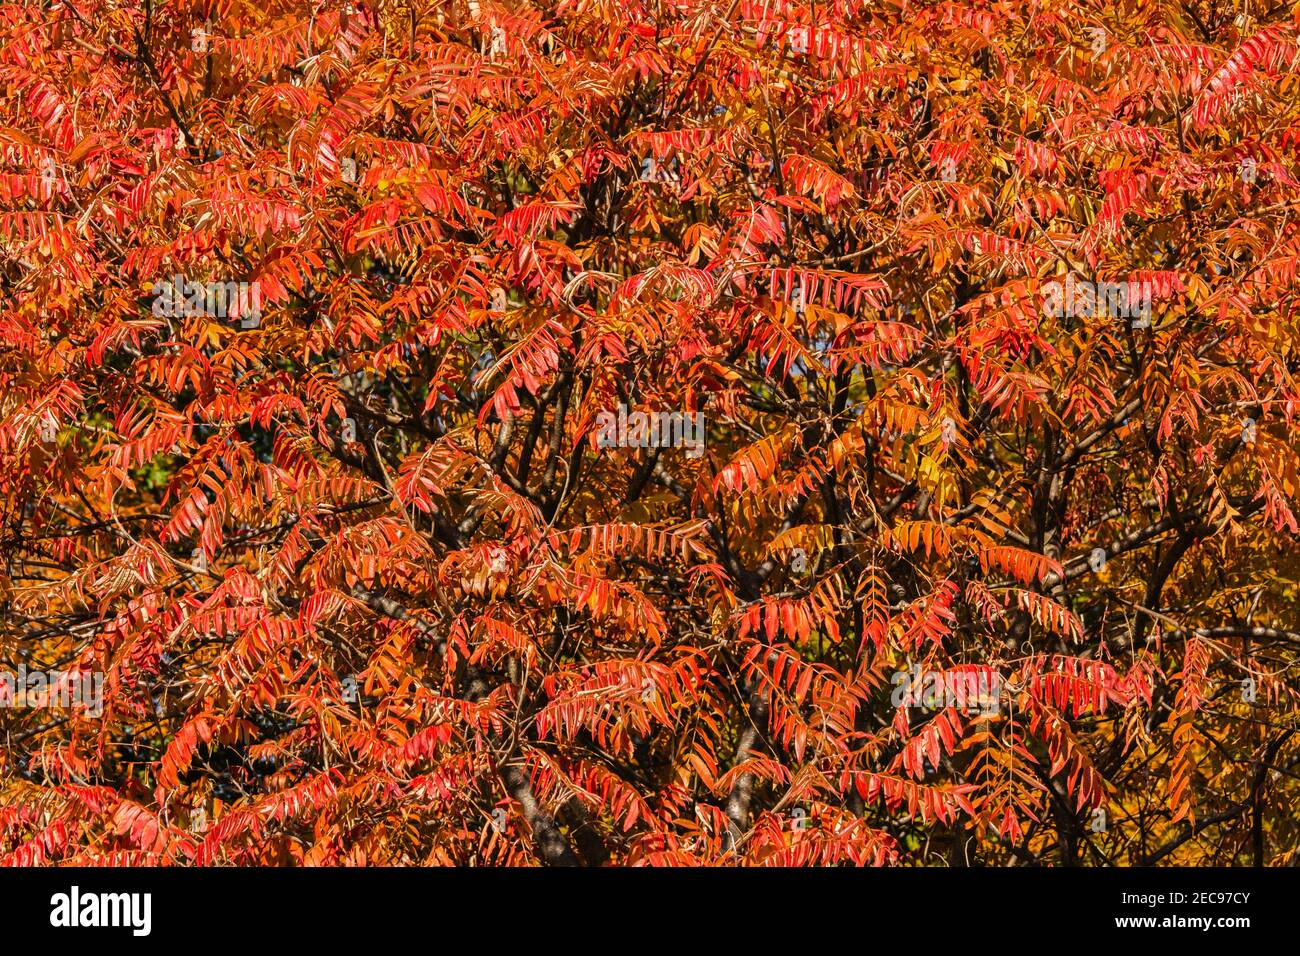 Staghorn Sumac is a small tree found in open and disturbed areas in the northeast United States and southeast Canada.  In autumn it displays brilliant Stock Photo